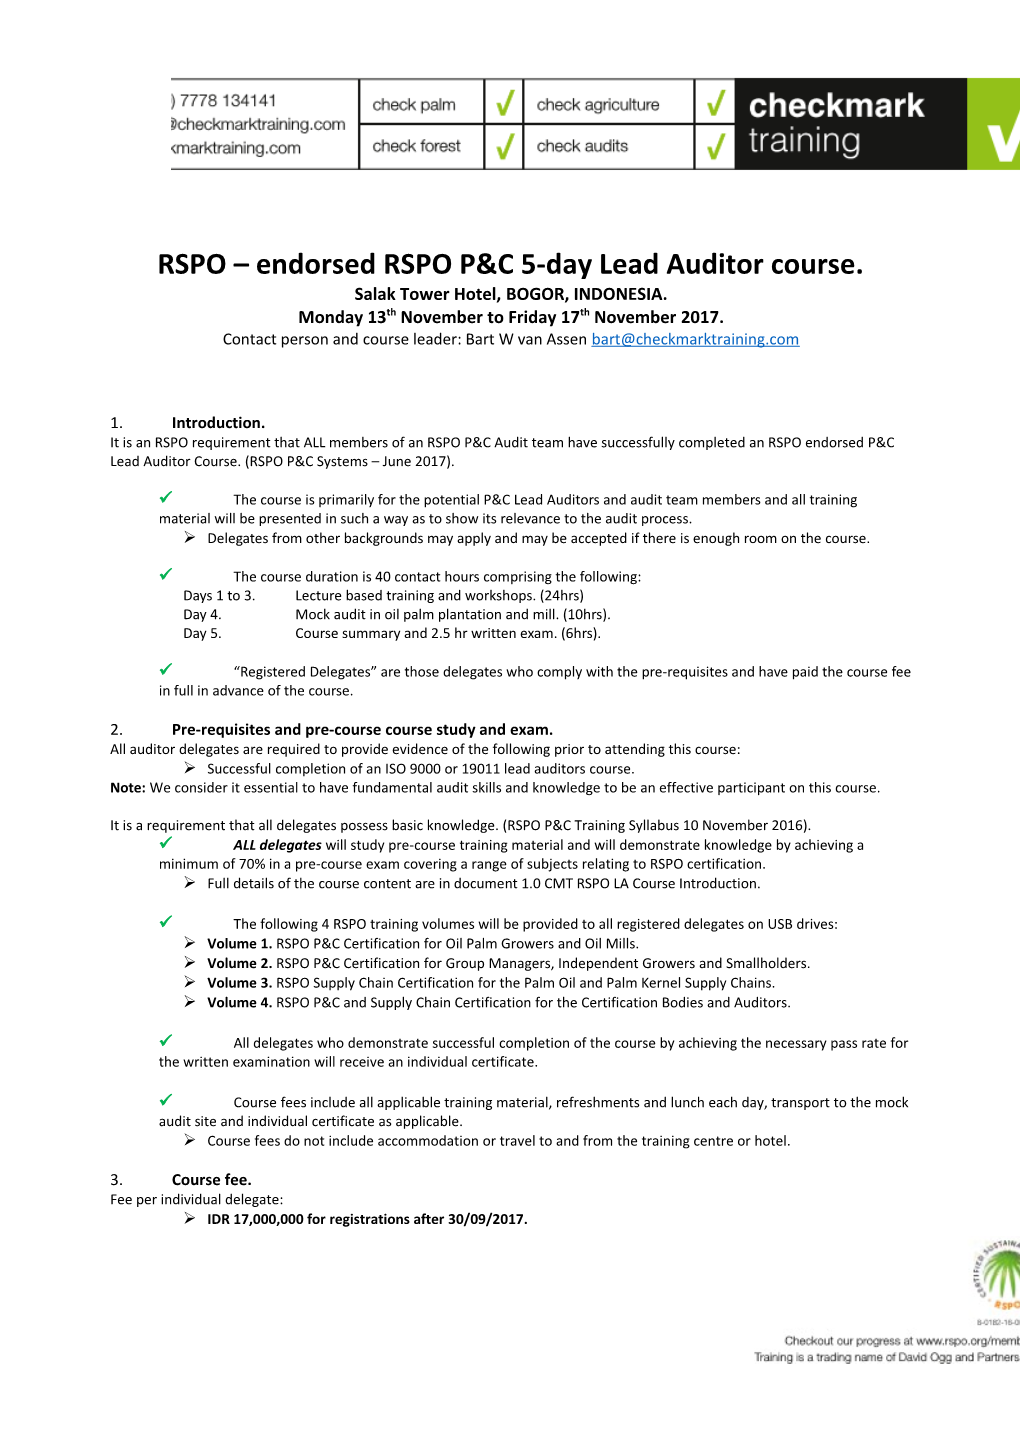 RSPO Endorsed RSPO P&C 5-Day Lead Auditor Course